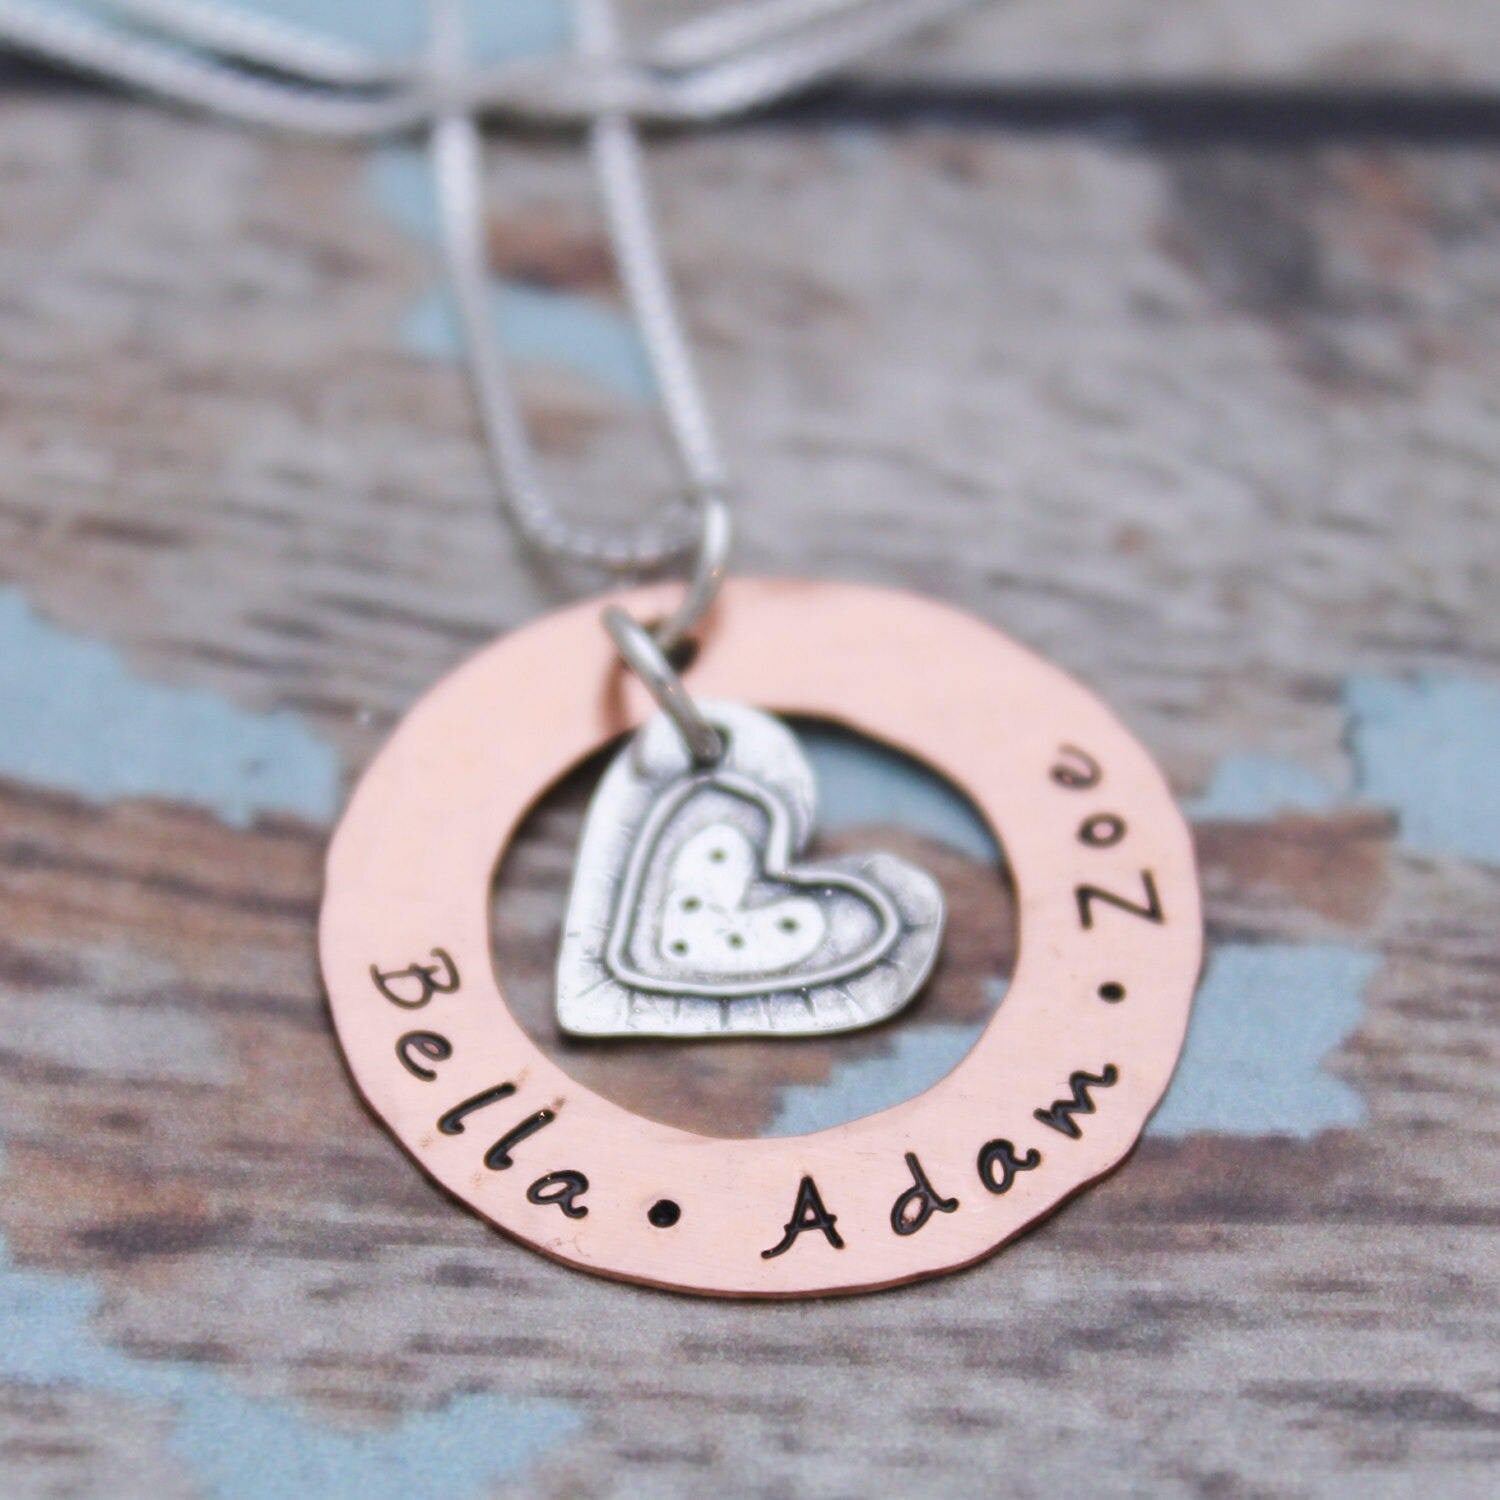 Personalized Heart Washer Necklace, Mother's Necklace, Copper or Sterling Silver Washer Necklace, Customized Mommy Jewelry, Hand Stamped